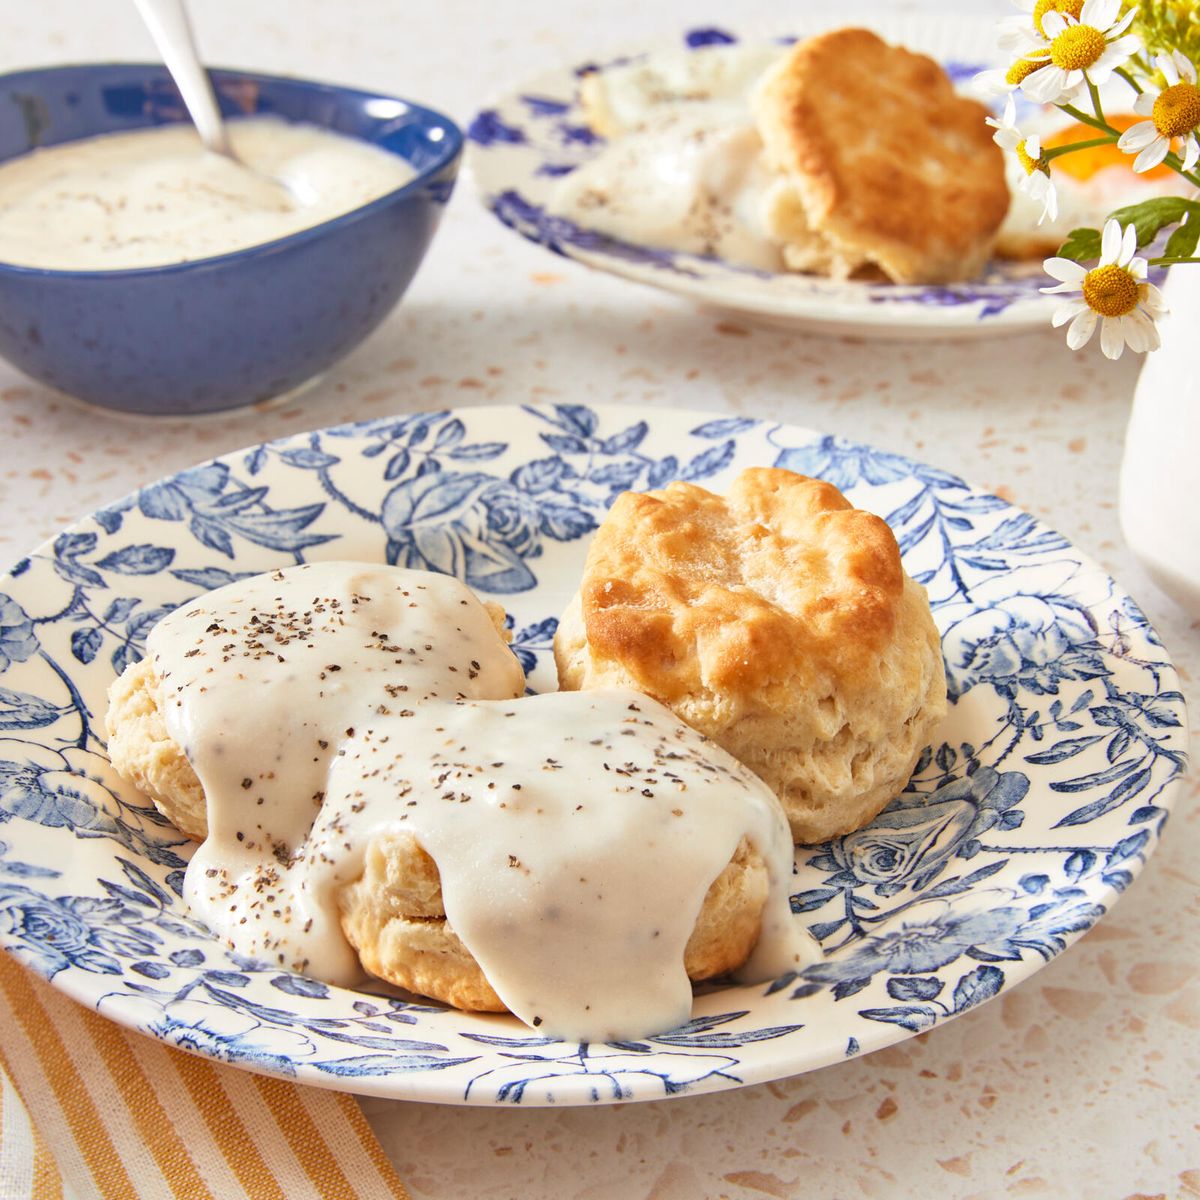 the pioneer woman's country gravy recipe